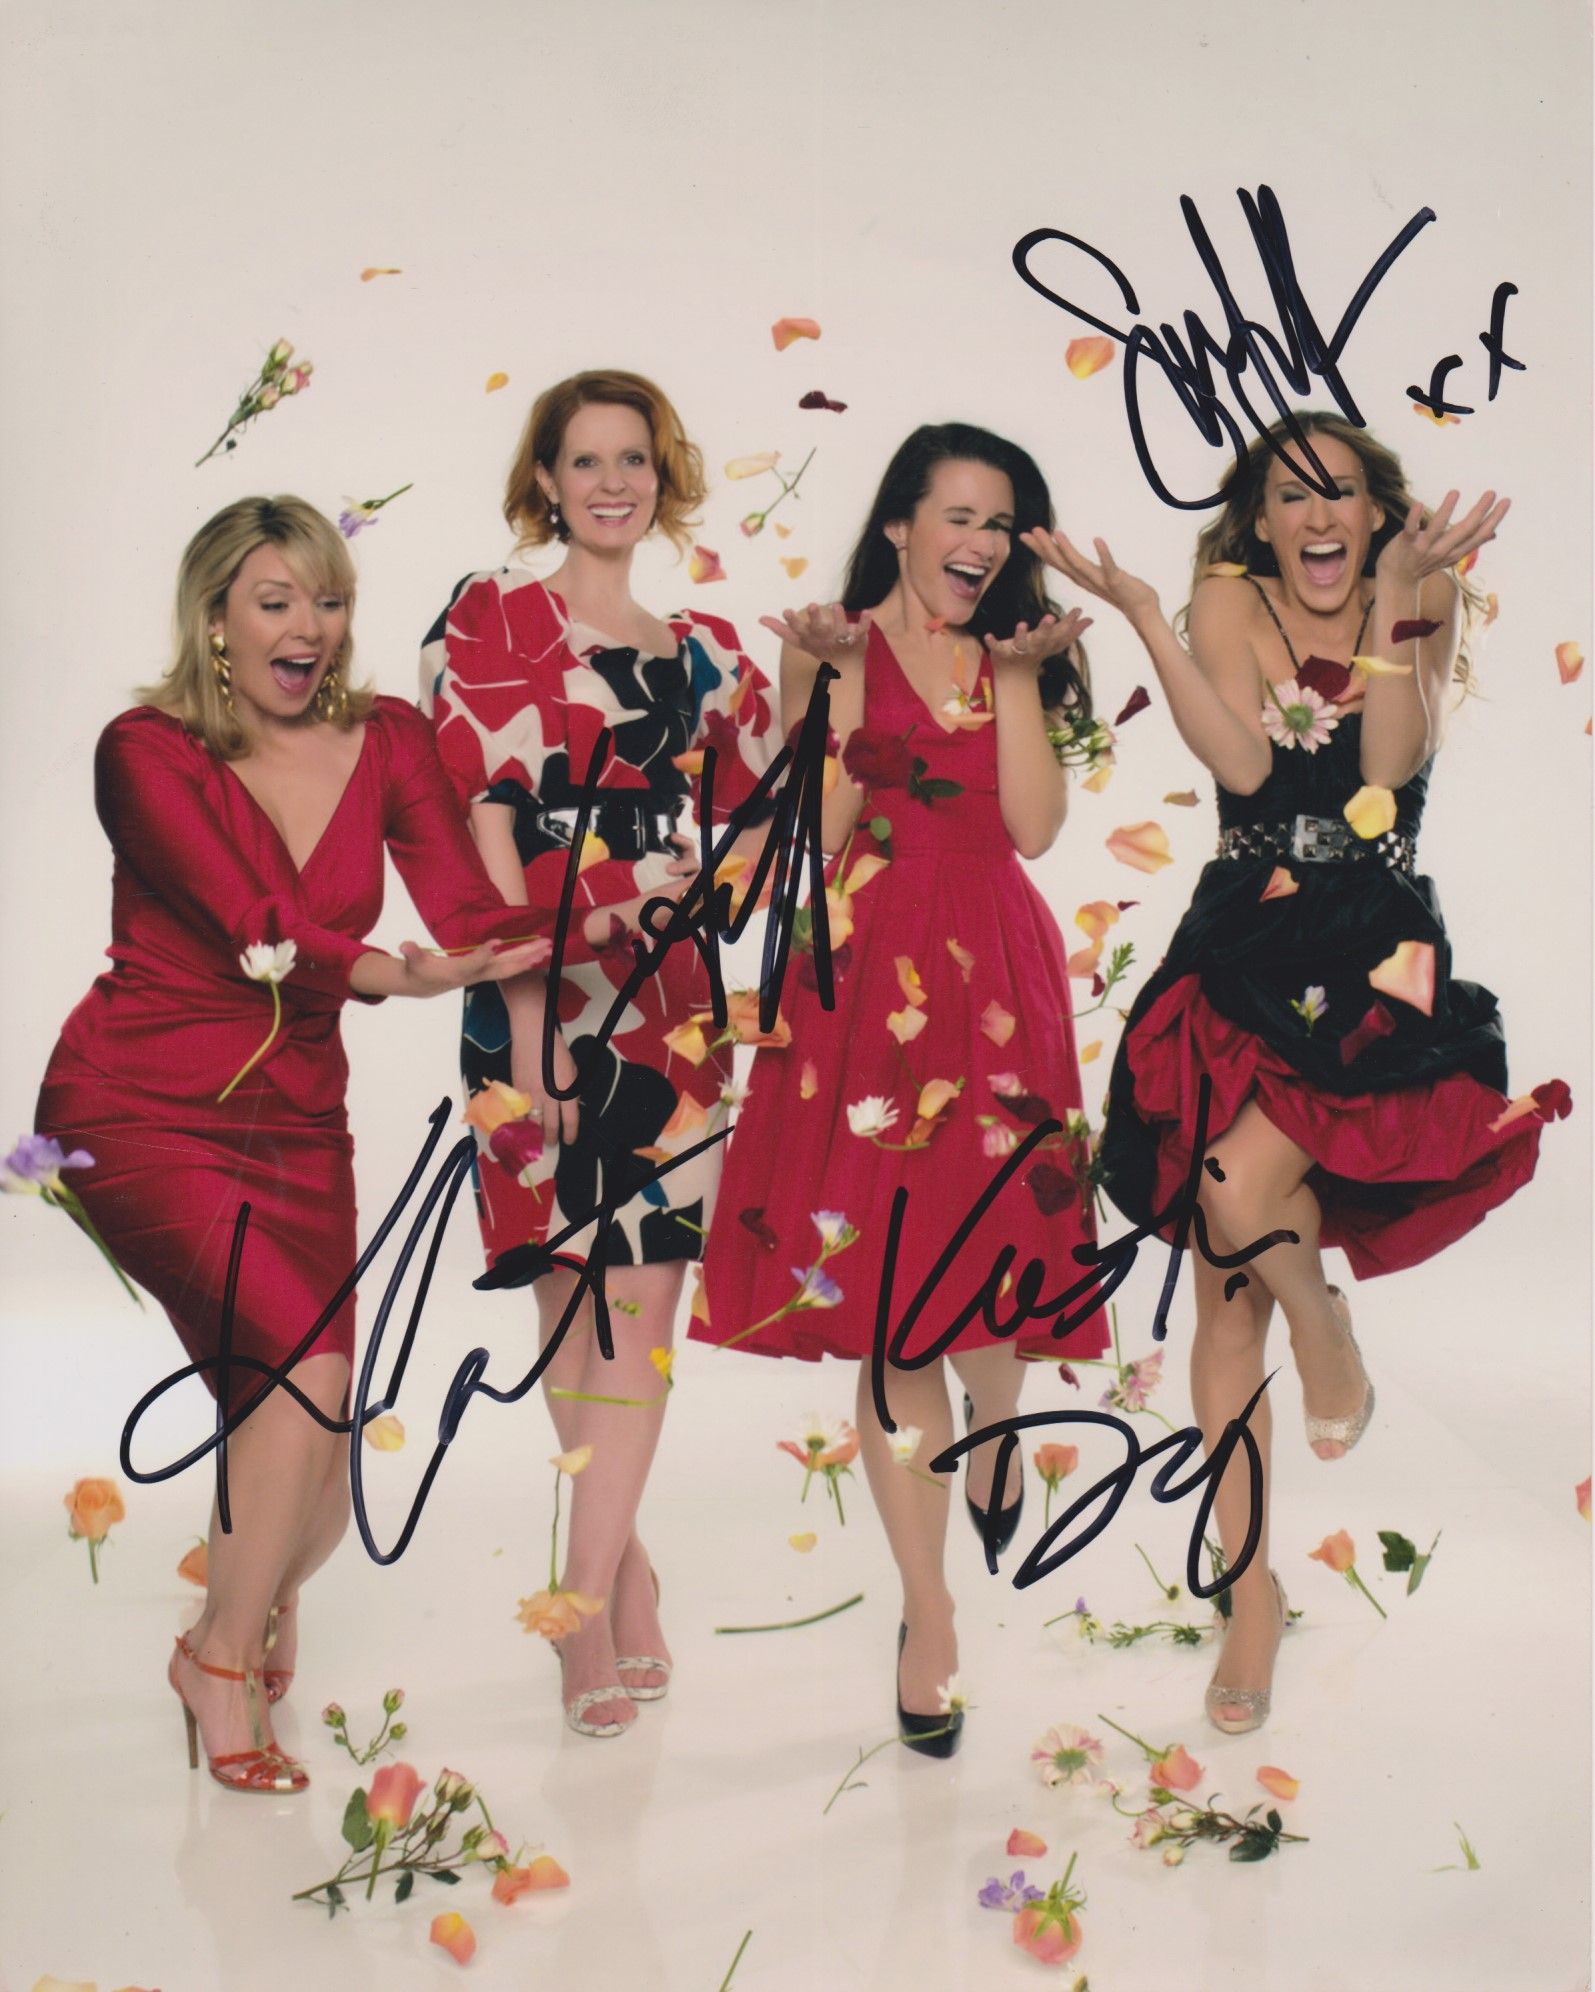 Aacs Autographs Sex In The City Cast Autographed Glossy 8x10 Photo